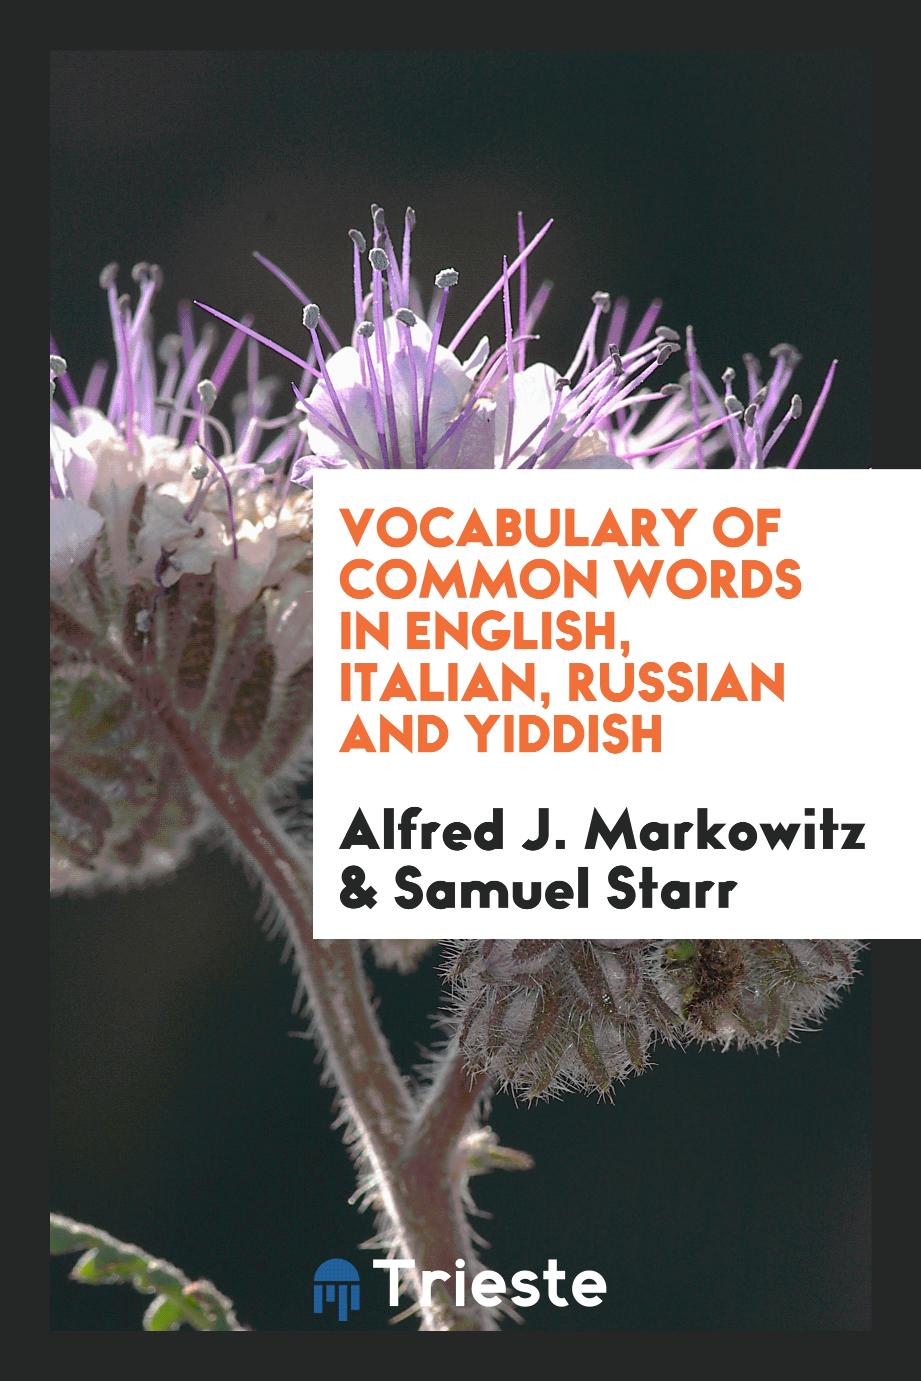 Vocabulary of common words in English, Italian, Russian and Yiddish